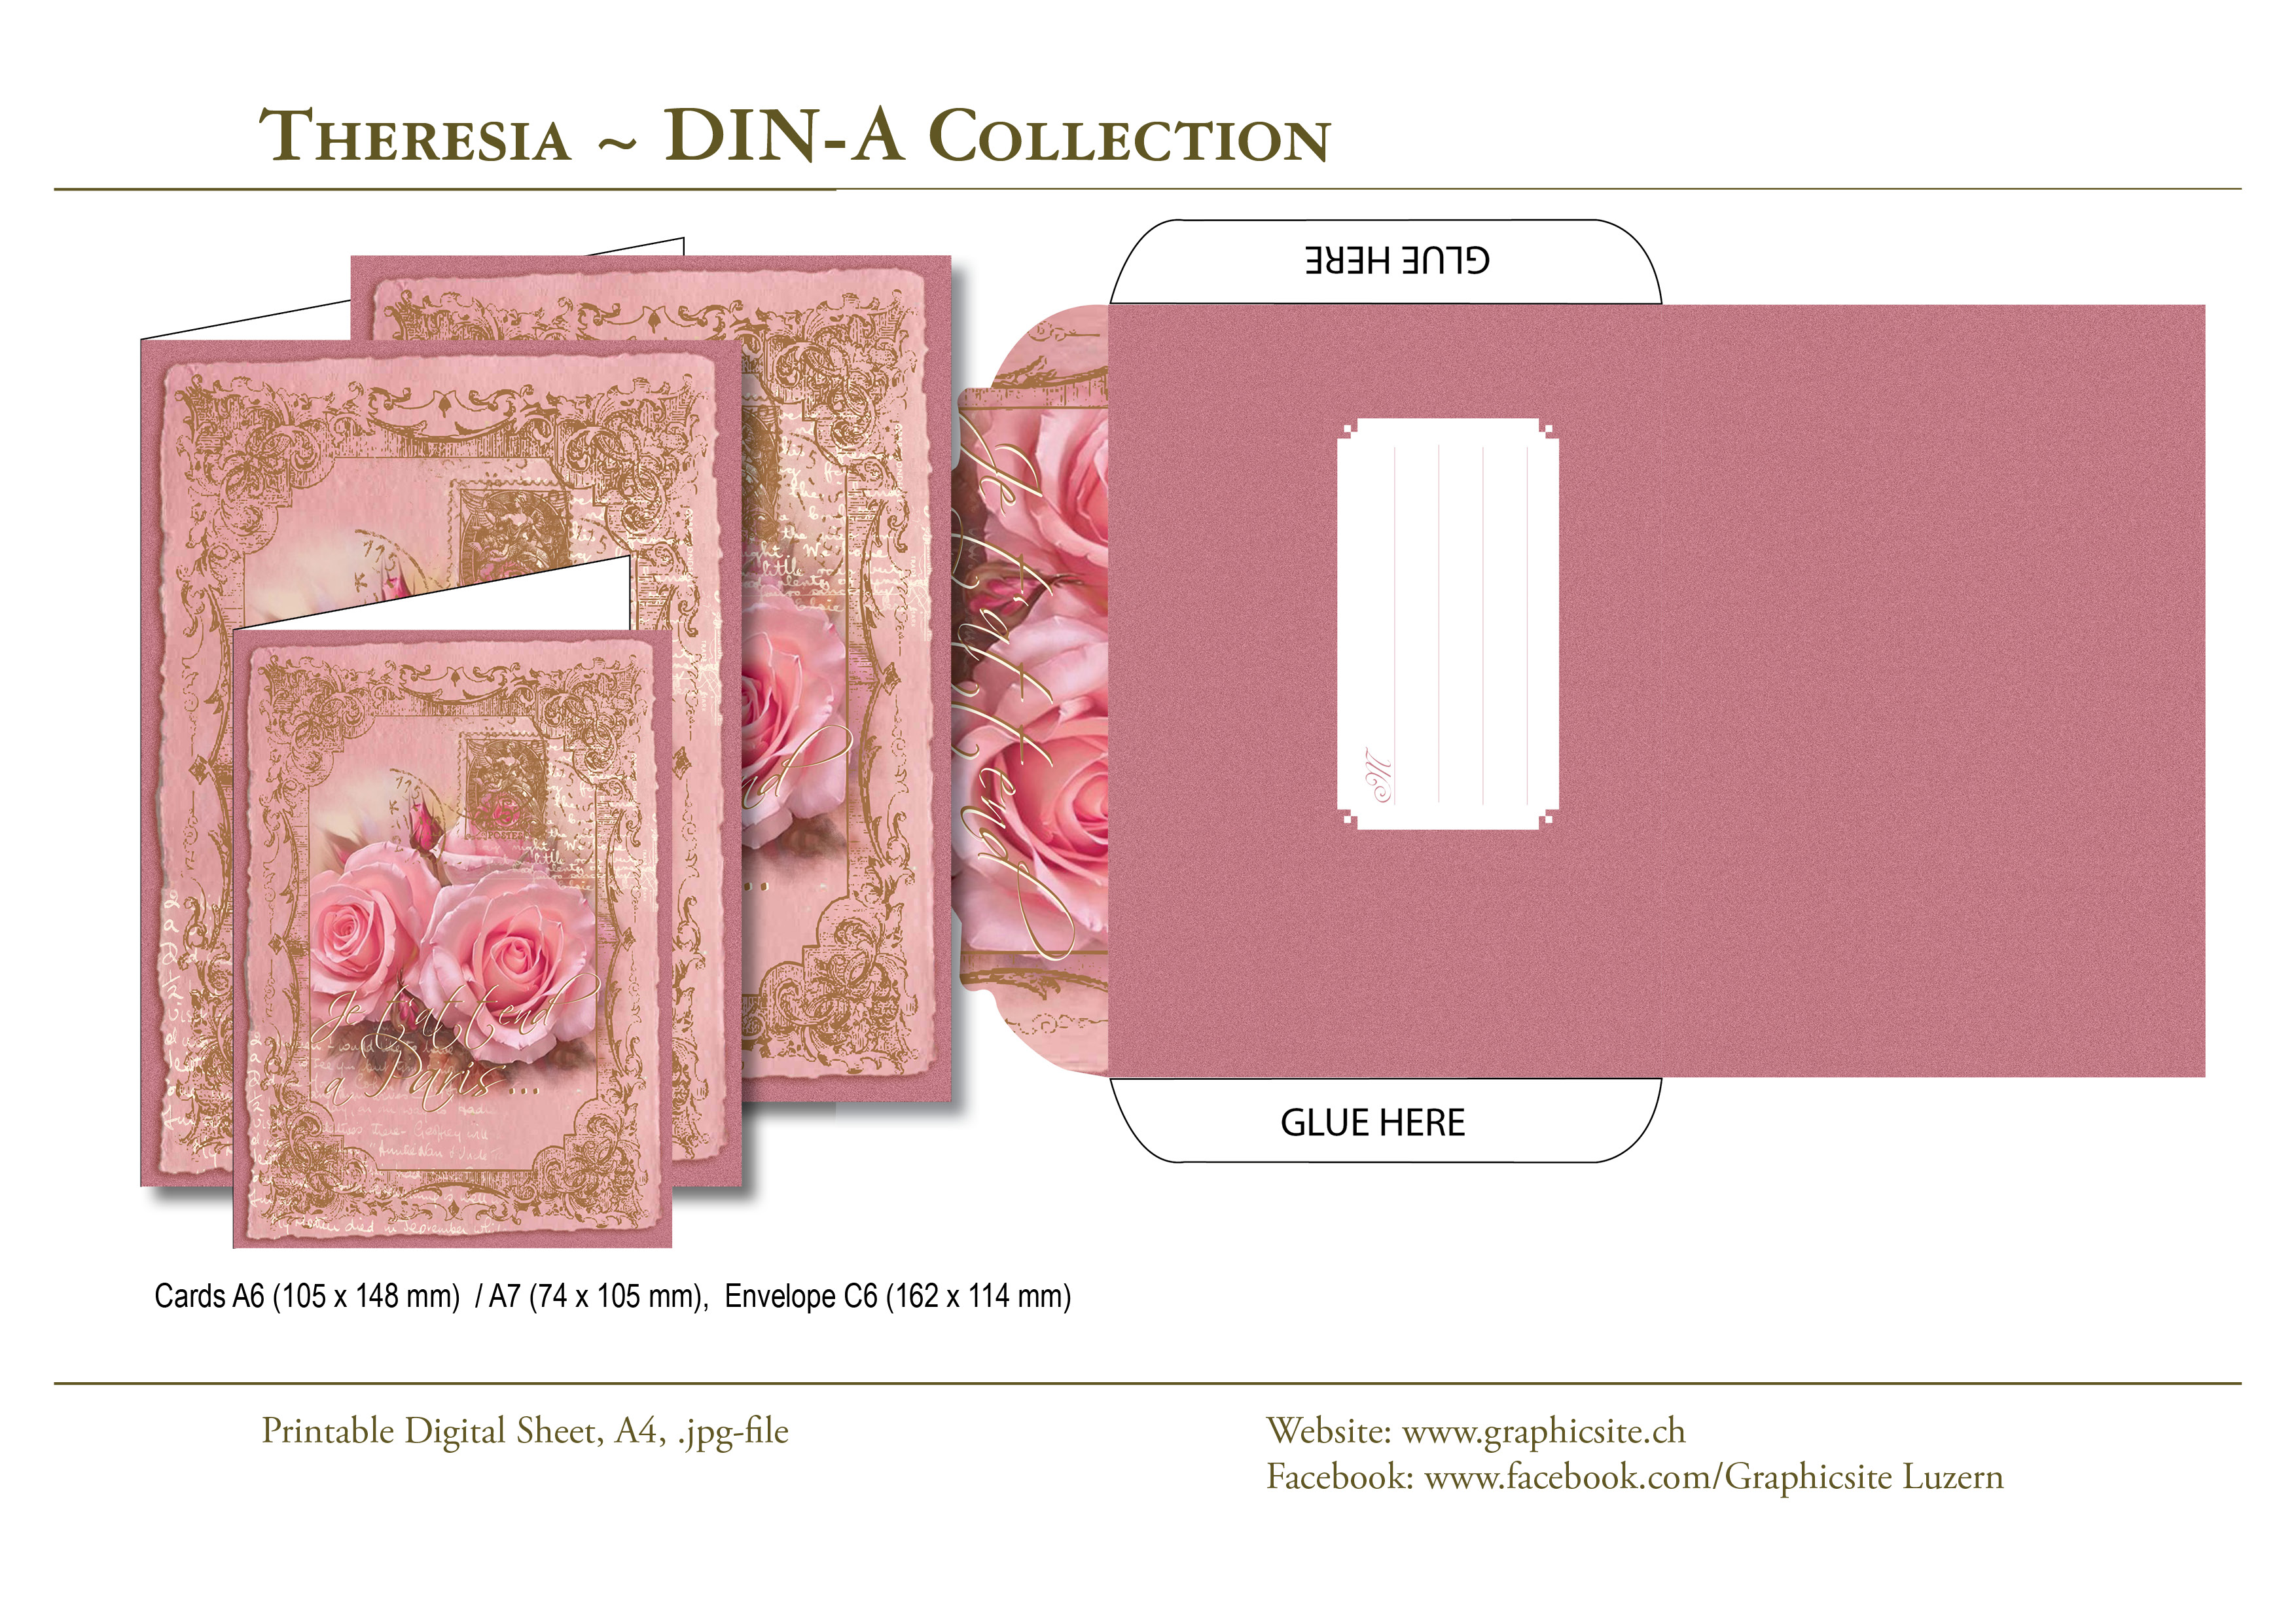 Printable Digital Sheets - DIN A Formats - Theresia-Tribute To Mom - #printable, #digital, #sheets, #scrapbooking, #roses, #flowers, #ornaments,